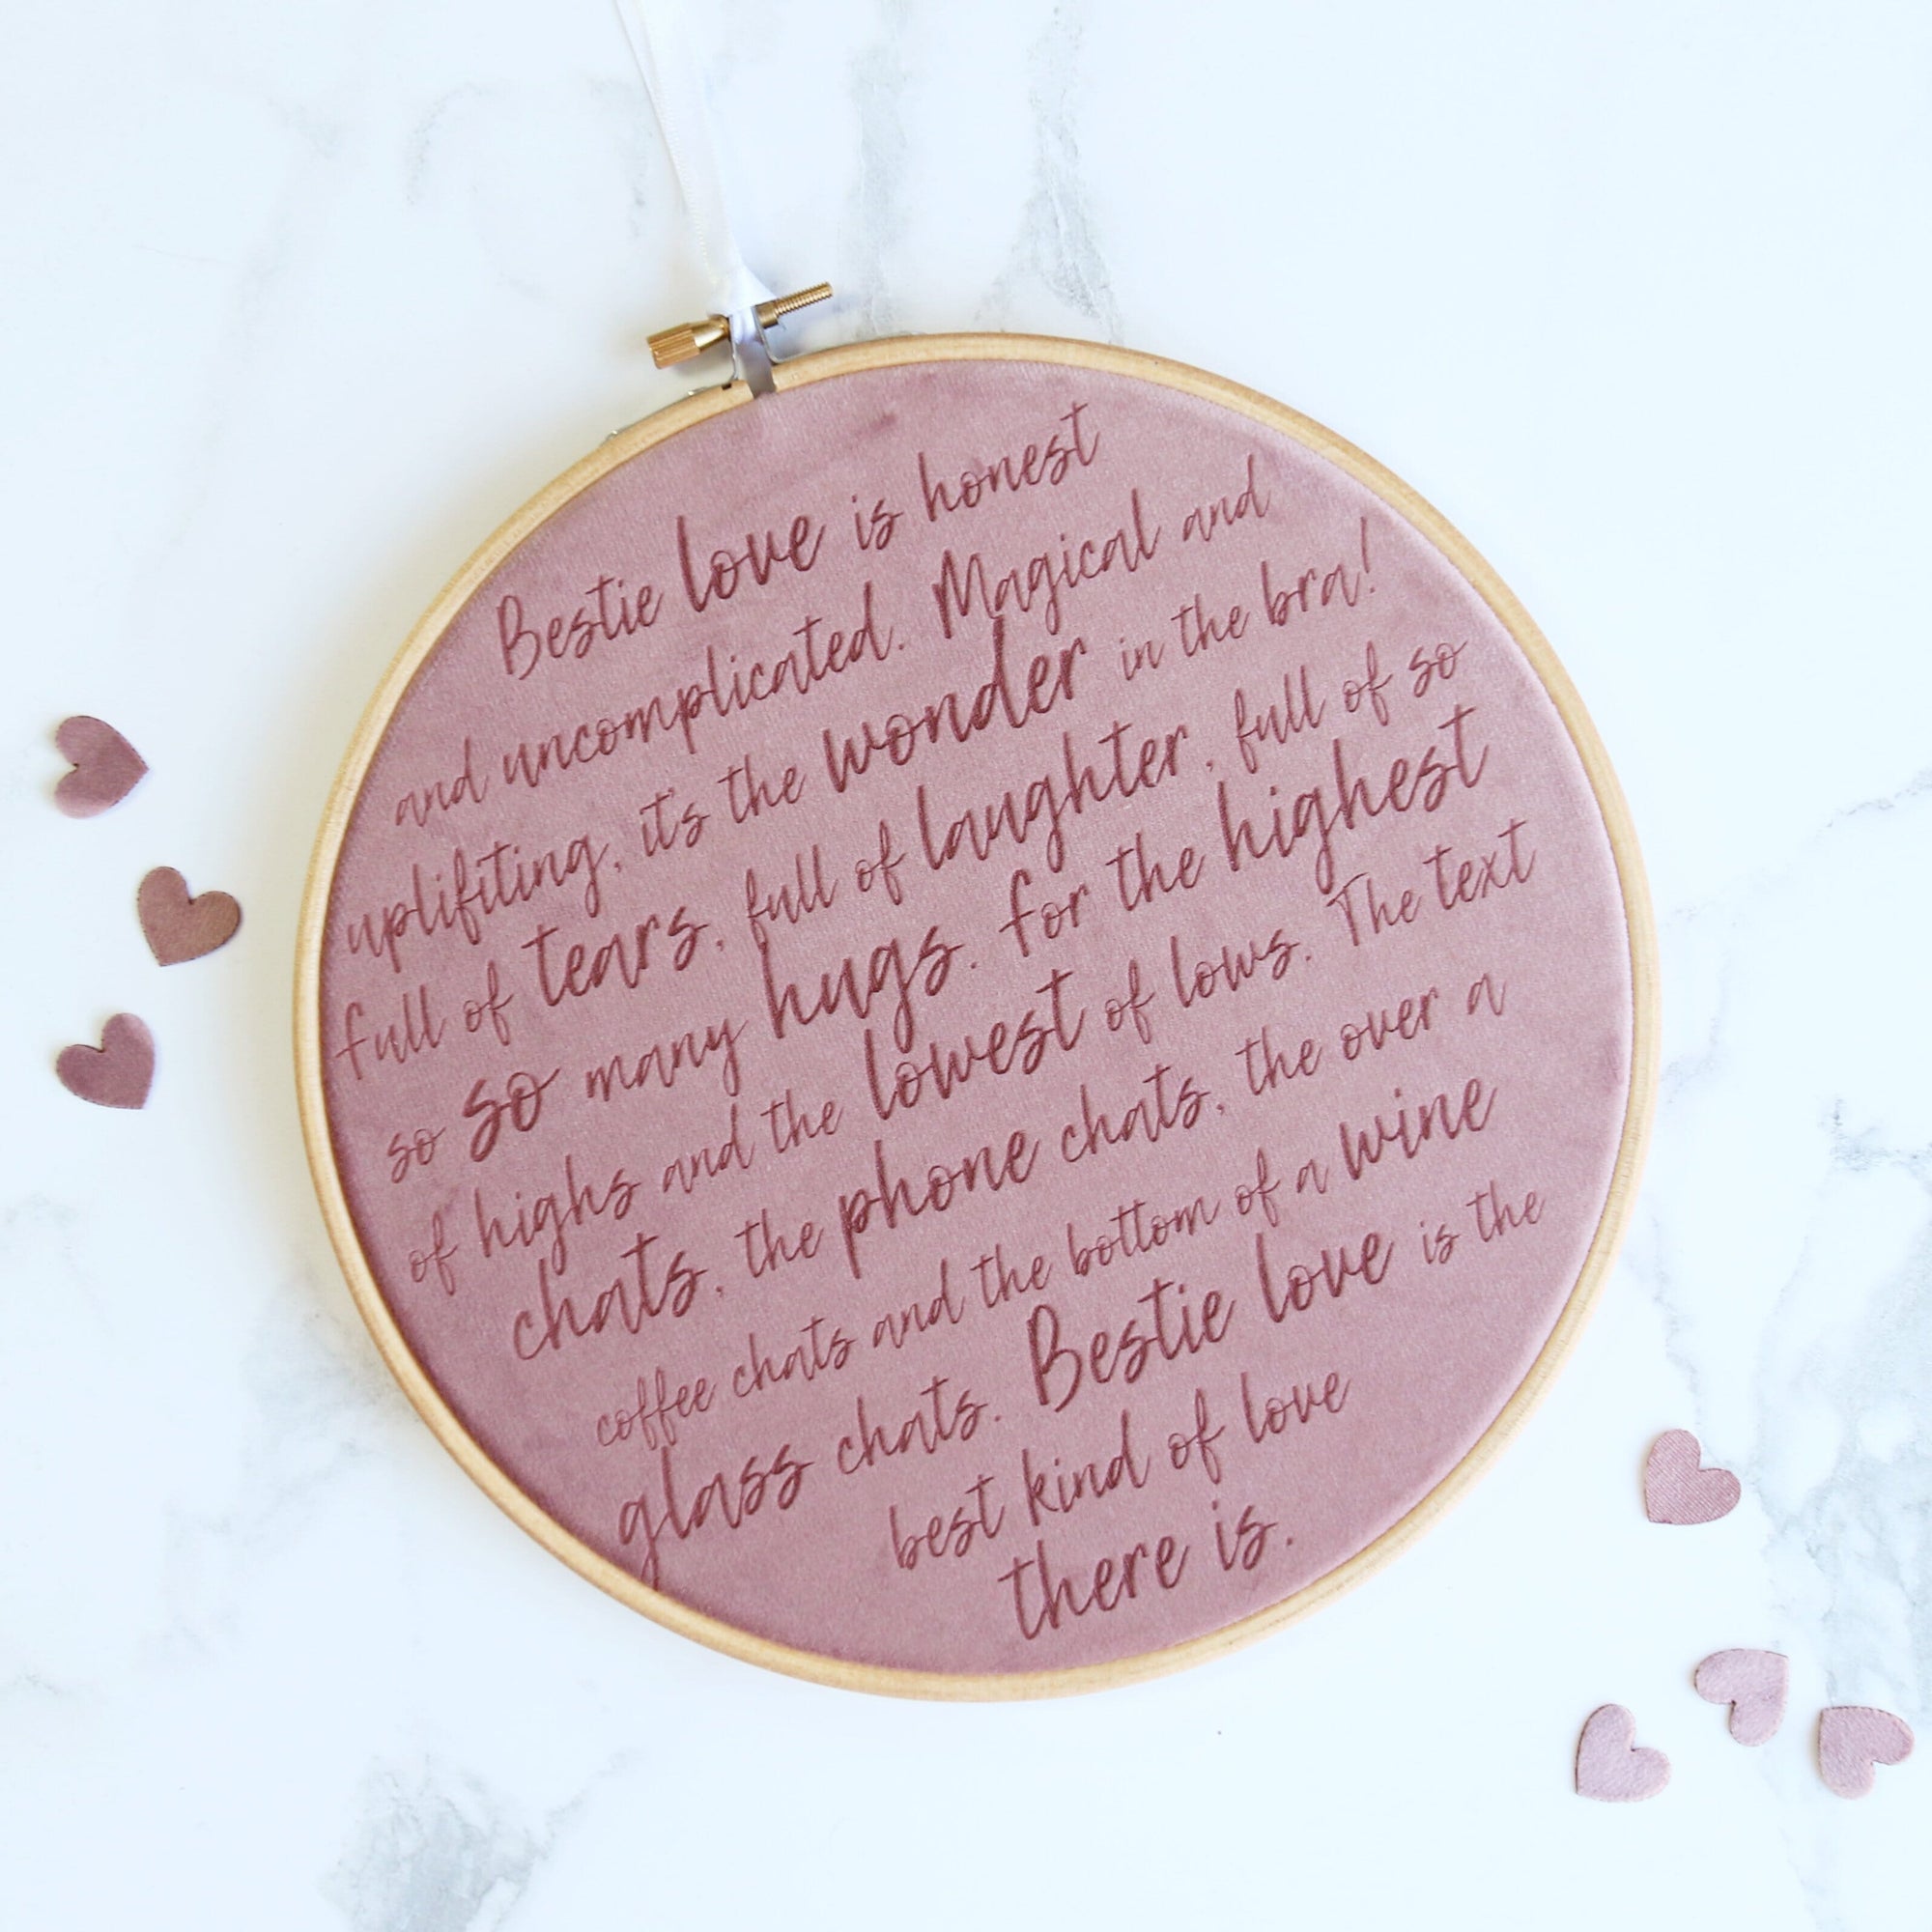  Embroidery hoop with brightly coloured velvet inside engraved with a poem about your BFF